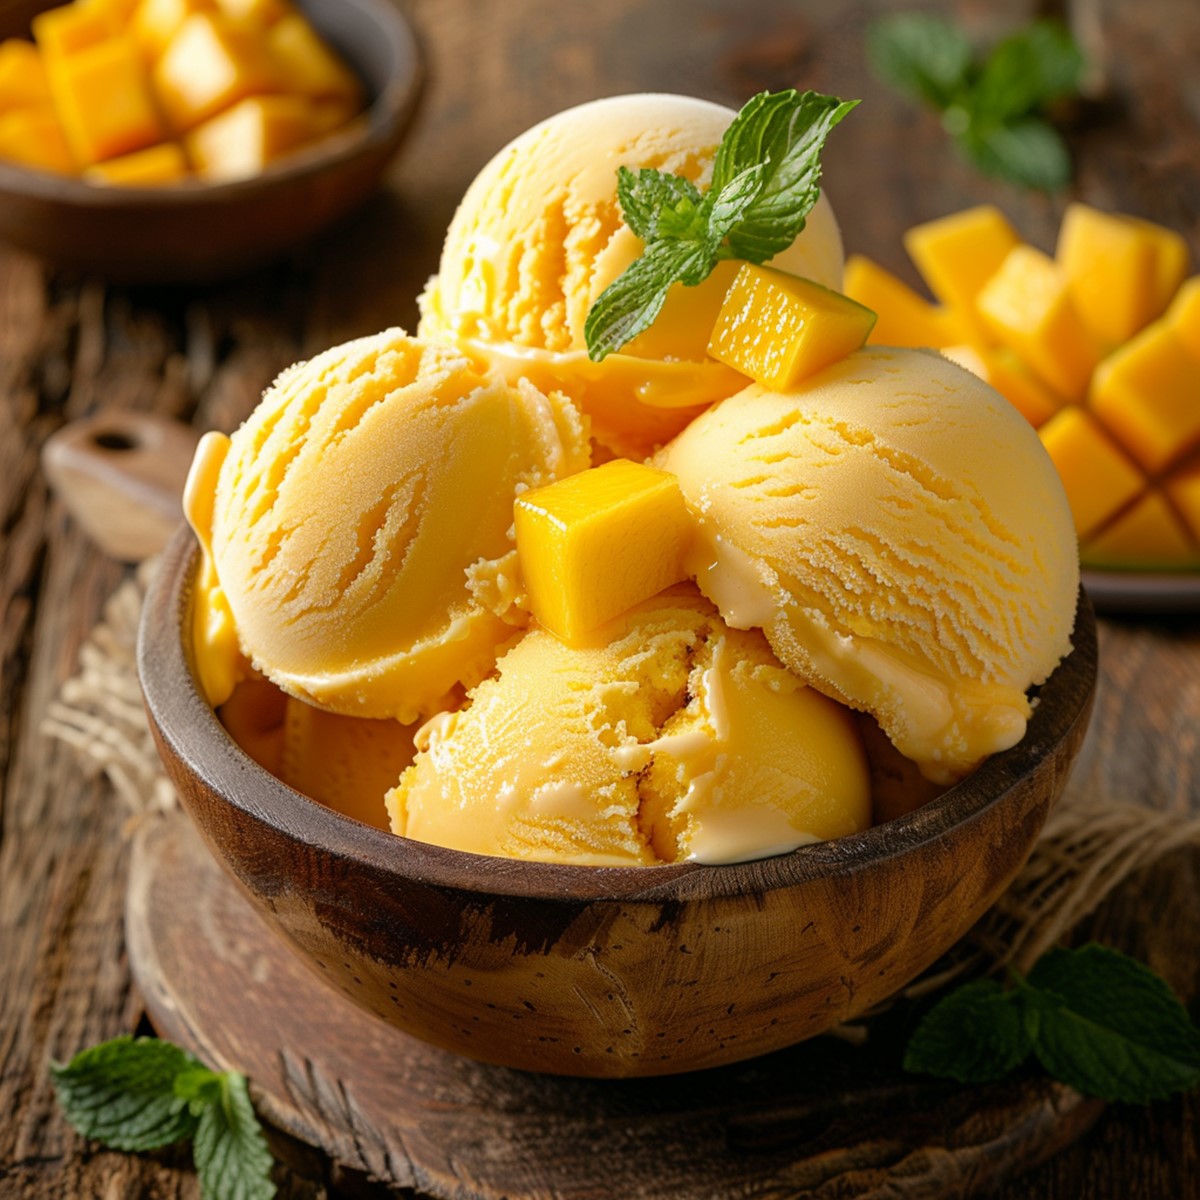 Creamy and refreshing Homemade Mango Ice Cream garnished with fresh mango chunks, served with fresh mango slices on a rustic wooden table.